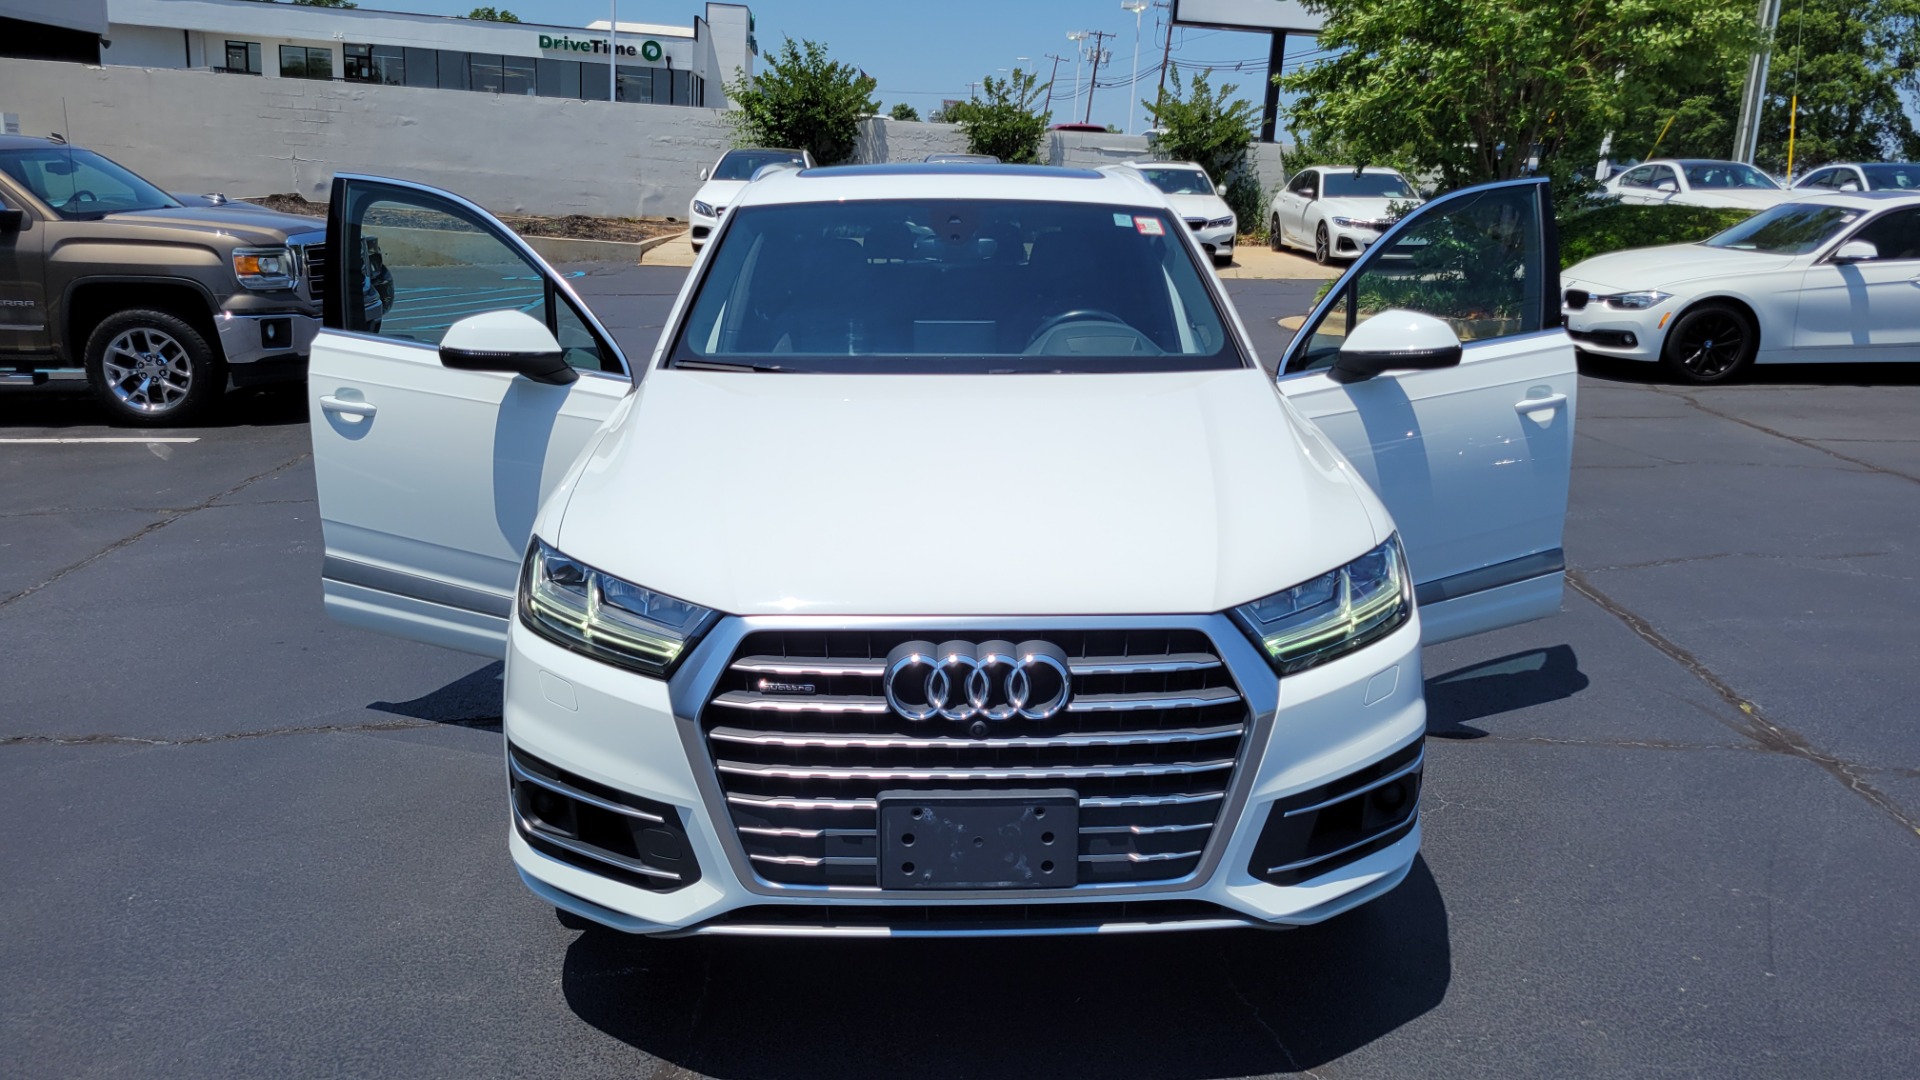 Used 2017 Audi Q7 PRESTIGE 3.0L SUV / NAV / DRVR ASST / CLD WTHR / SUNROOF / TOW / 3-ROW for sale $40,995 at Formula Imports in Charlotte NC 28227 29